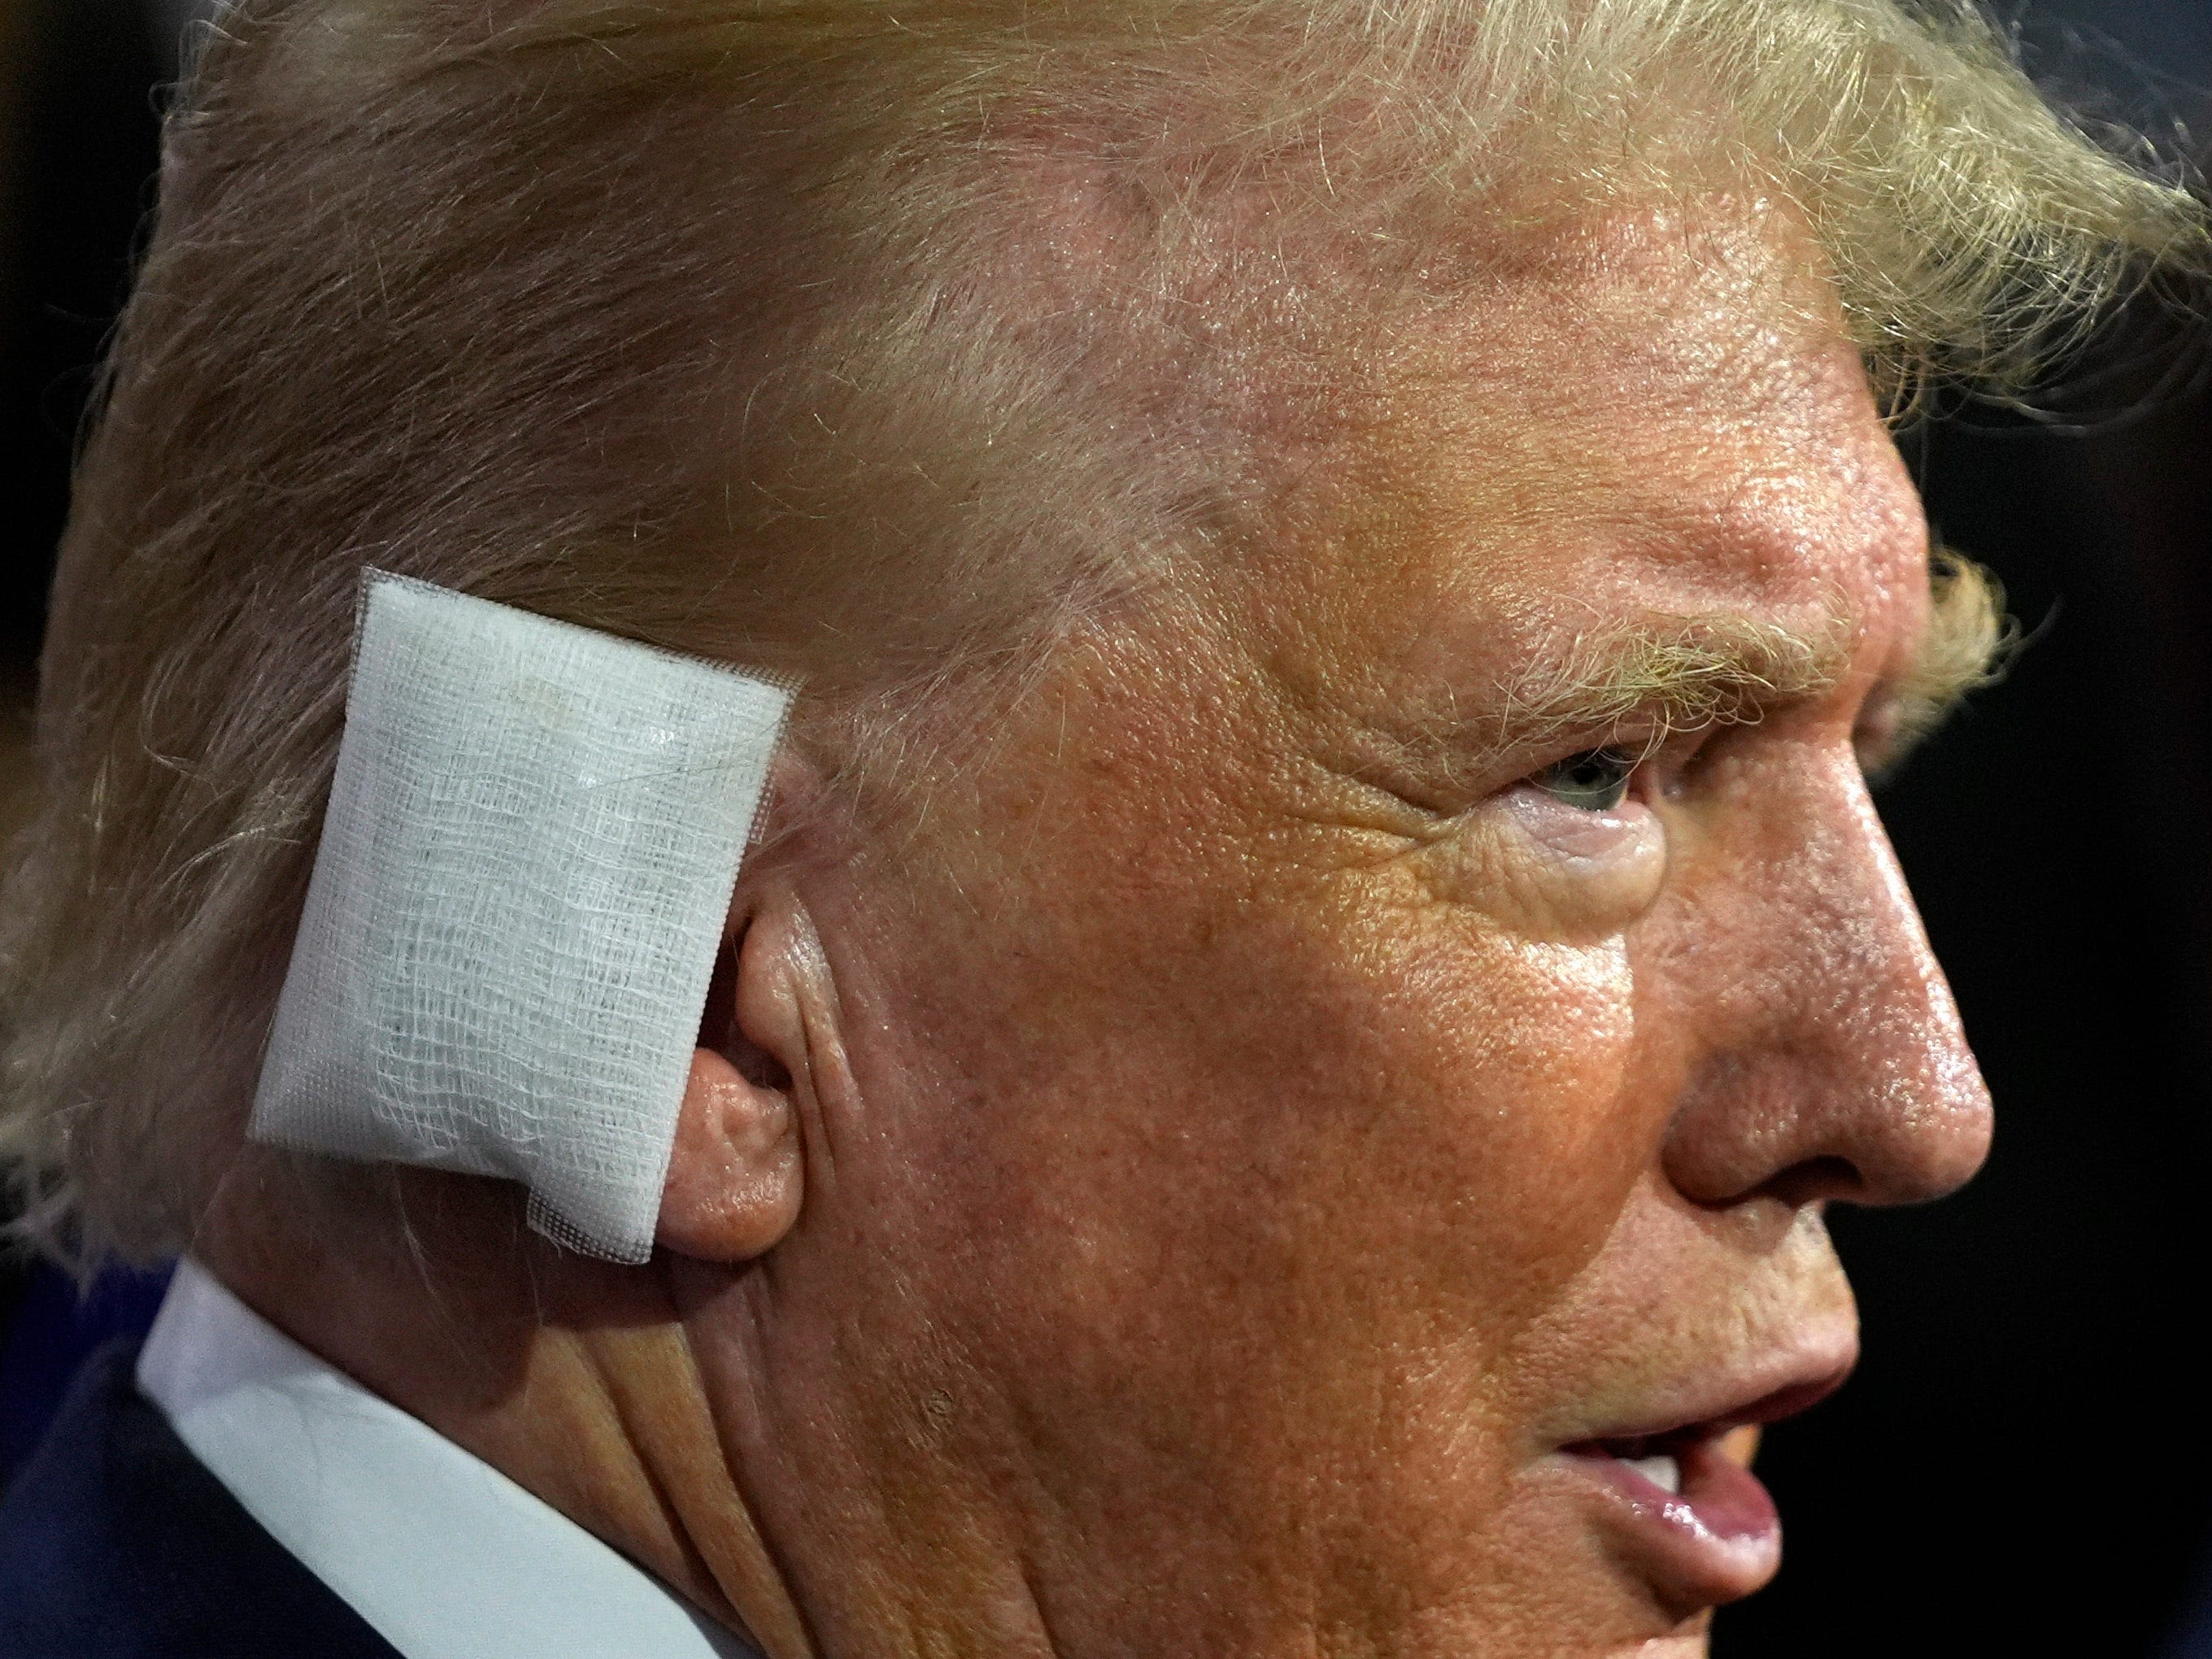 Trump is back out in the spotlight for the first time after his assassination attempt, and he's wearing a massive rectangular bandage over his ear